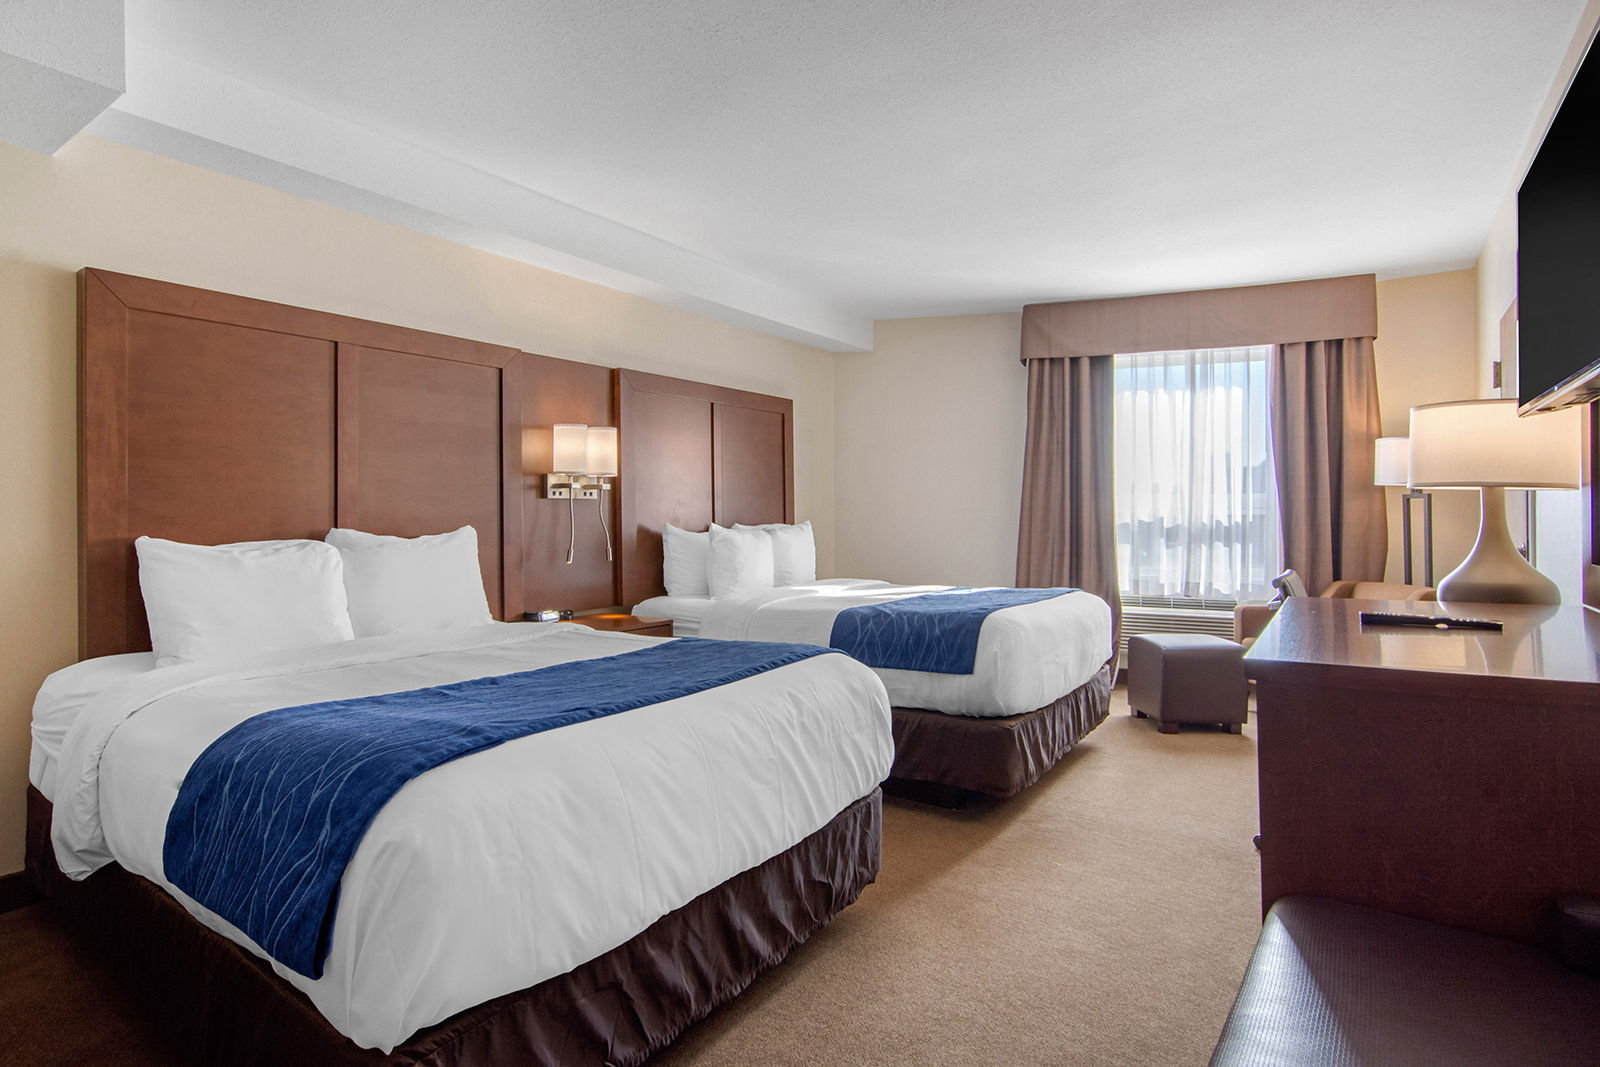 Rooms have been outfitted with modern and bright furnishings, including new beds and bedding, as well as amenities such as 50-inch TVs.